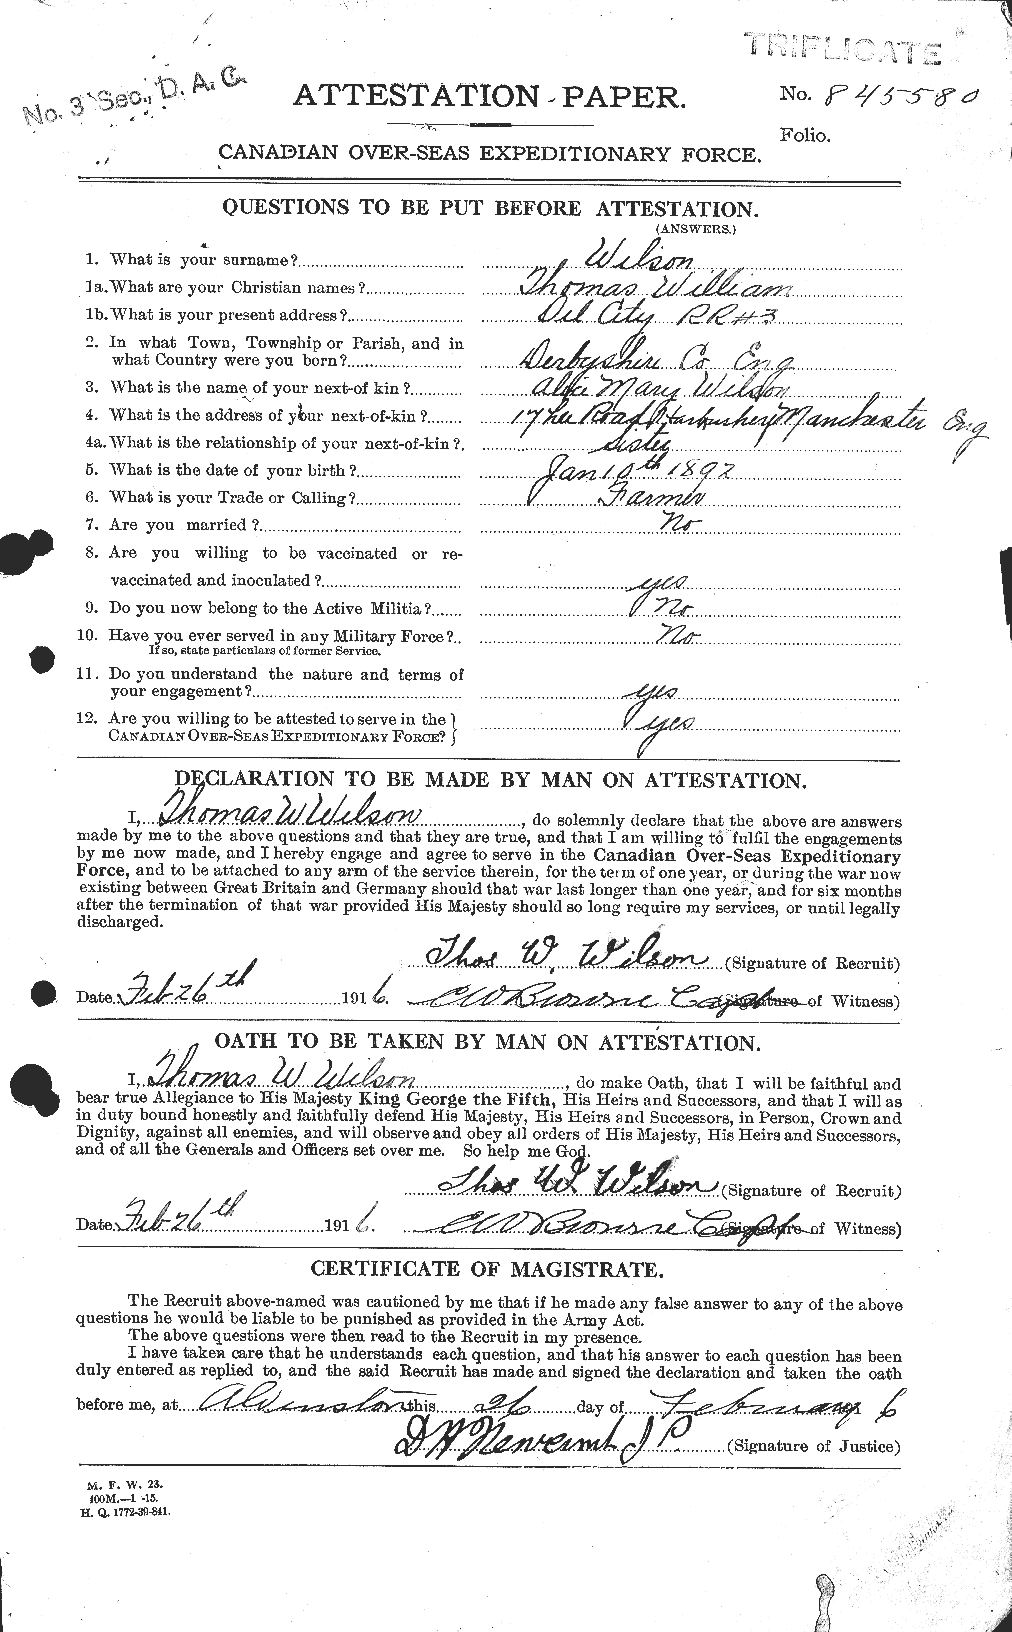 Personnel Records of the First World War - CEF 681697a